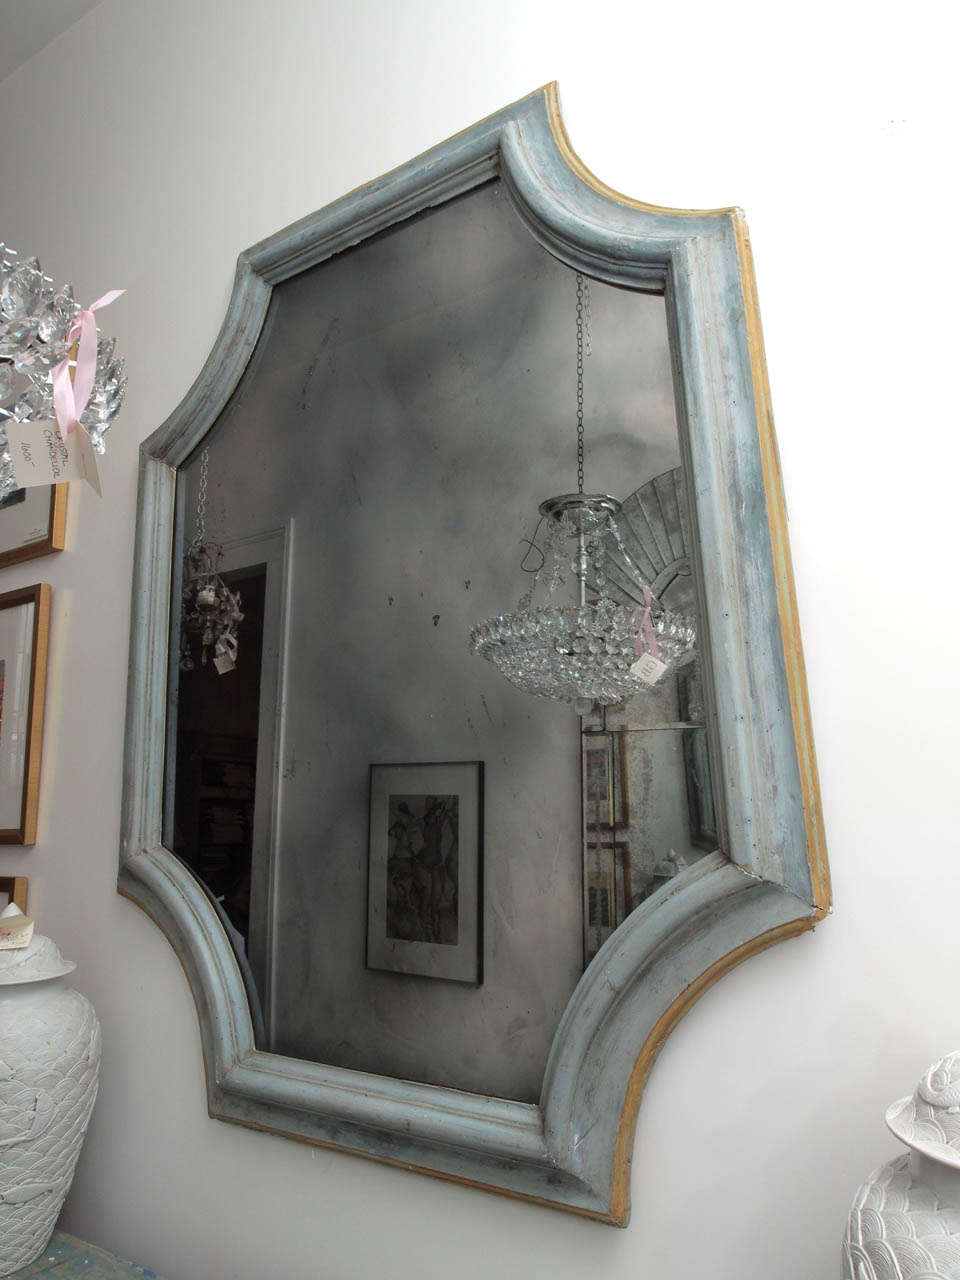 Pair of large 19th century French mirrors. The curving octagon shaped wood frame is painted French blue with contrasting border and surrounds a smoked glass mirror.